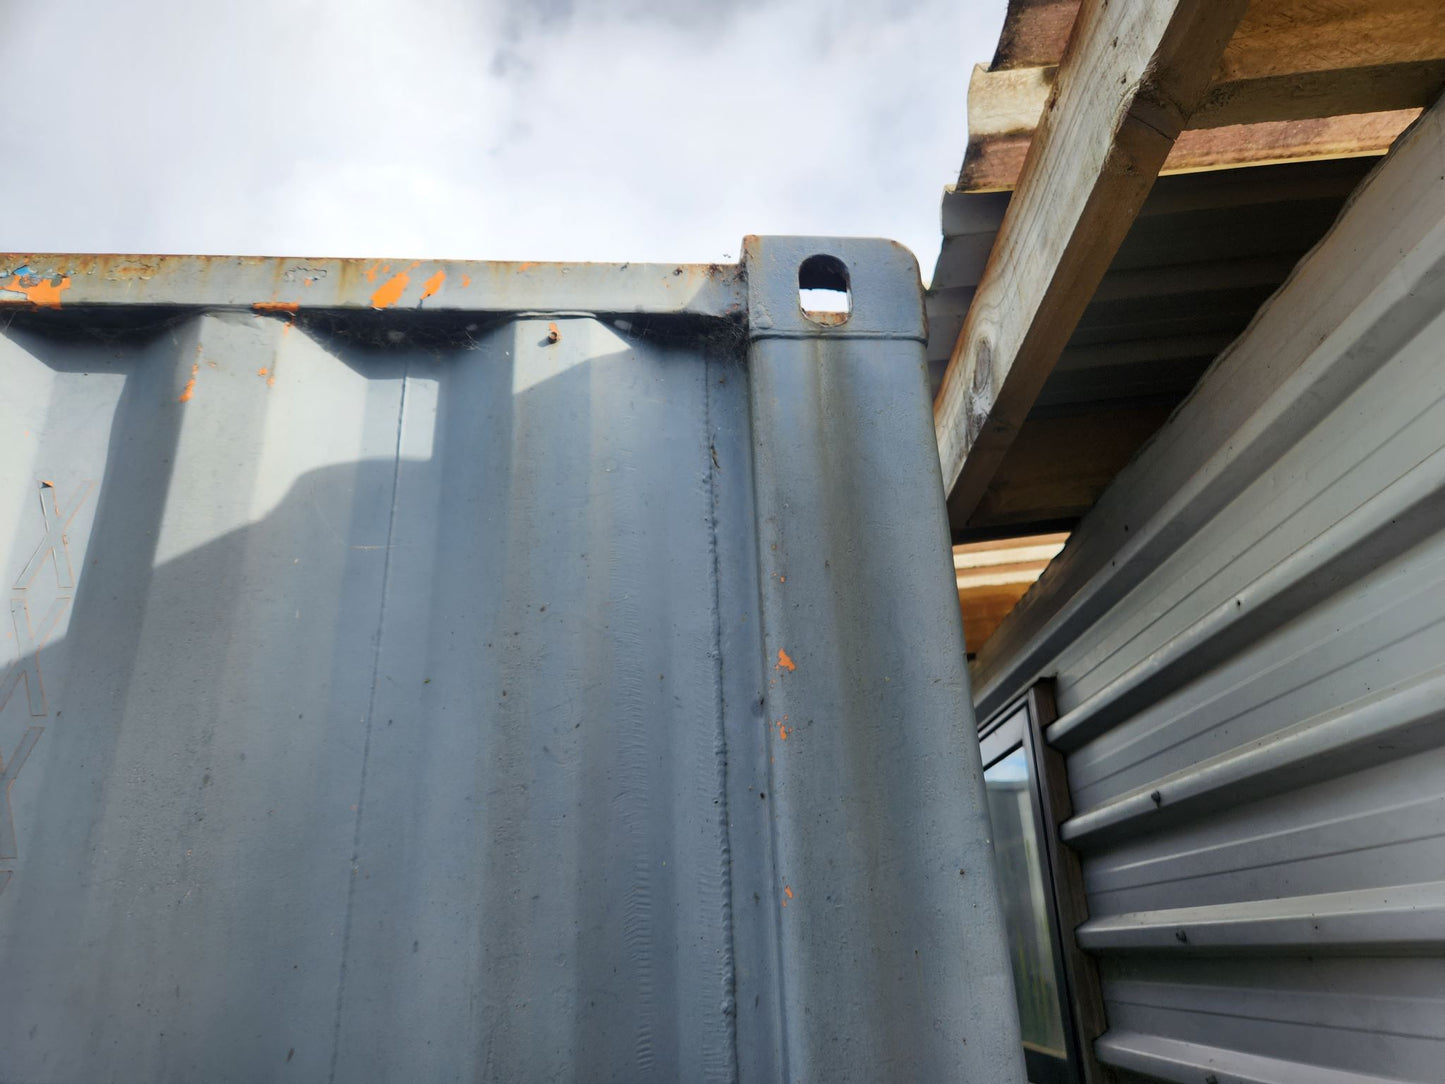 10ft Shipping Container 4 x lugs on each corner for twist locks